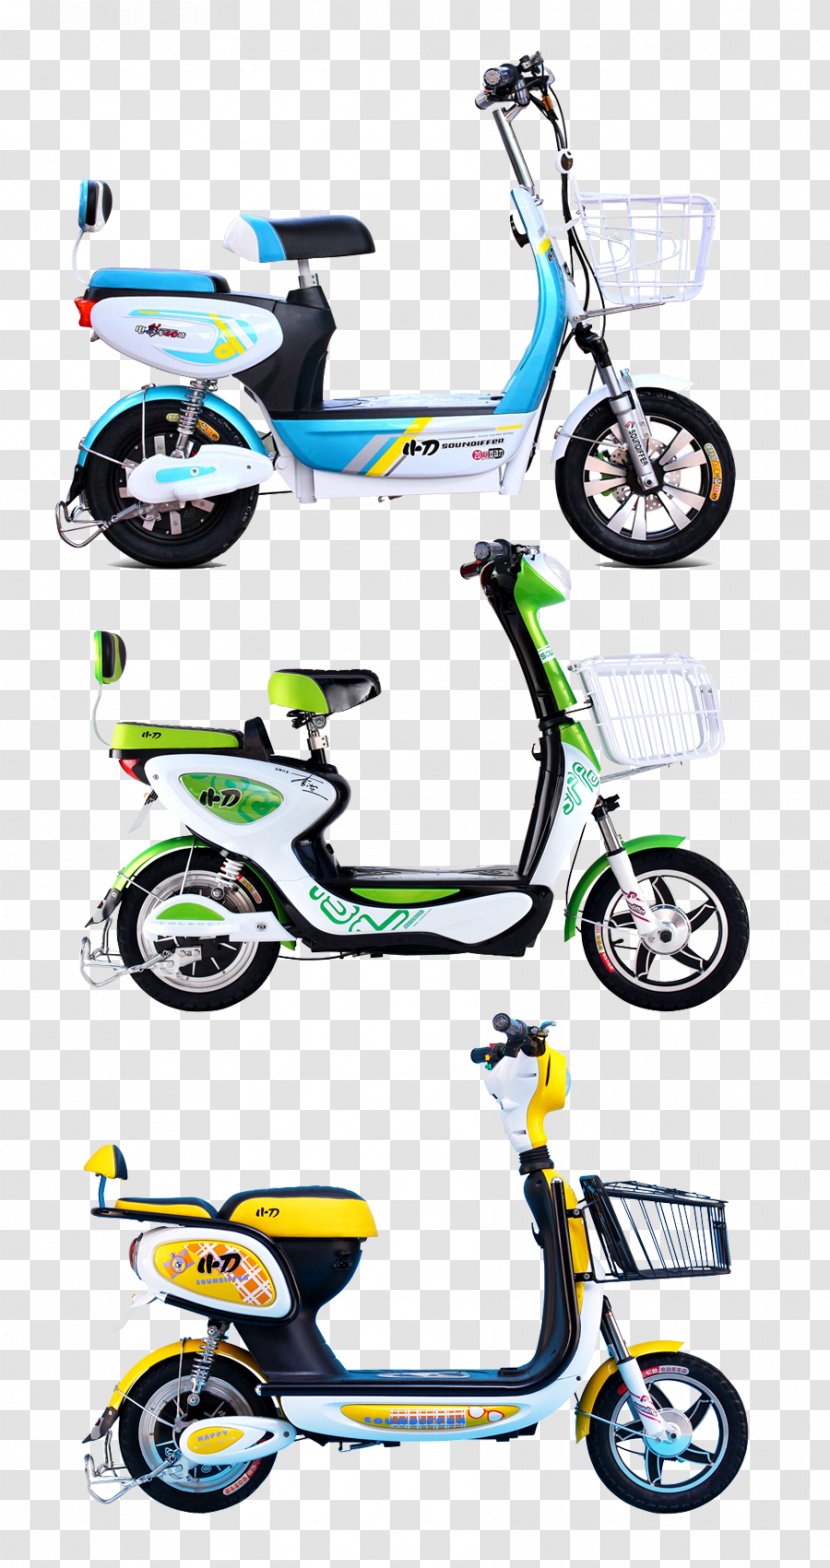 Car Electric Vehicle Knife Game Icon Bicycle Frame Transparent PNG